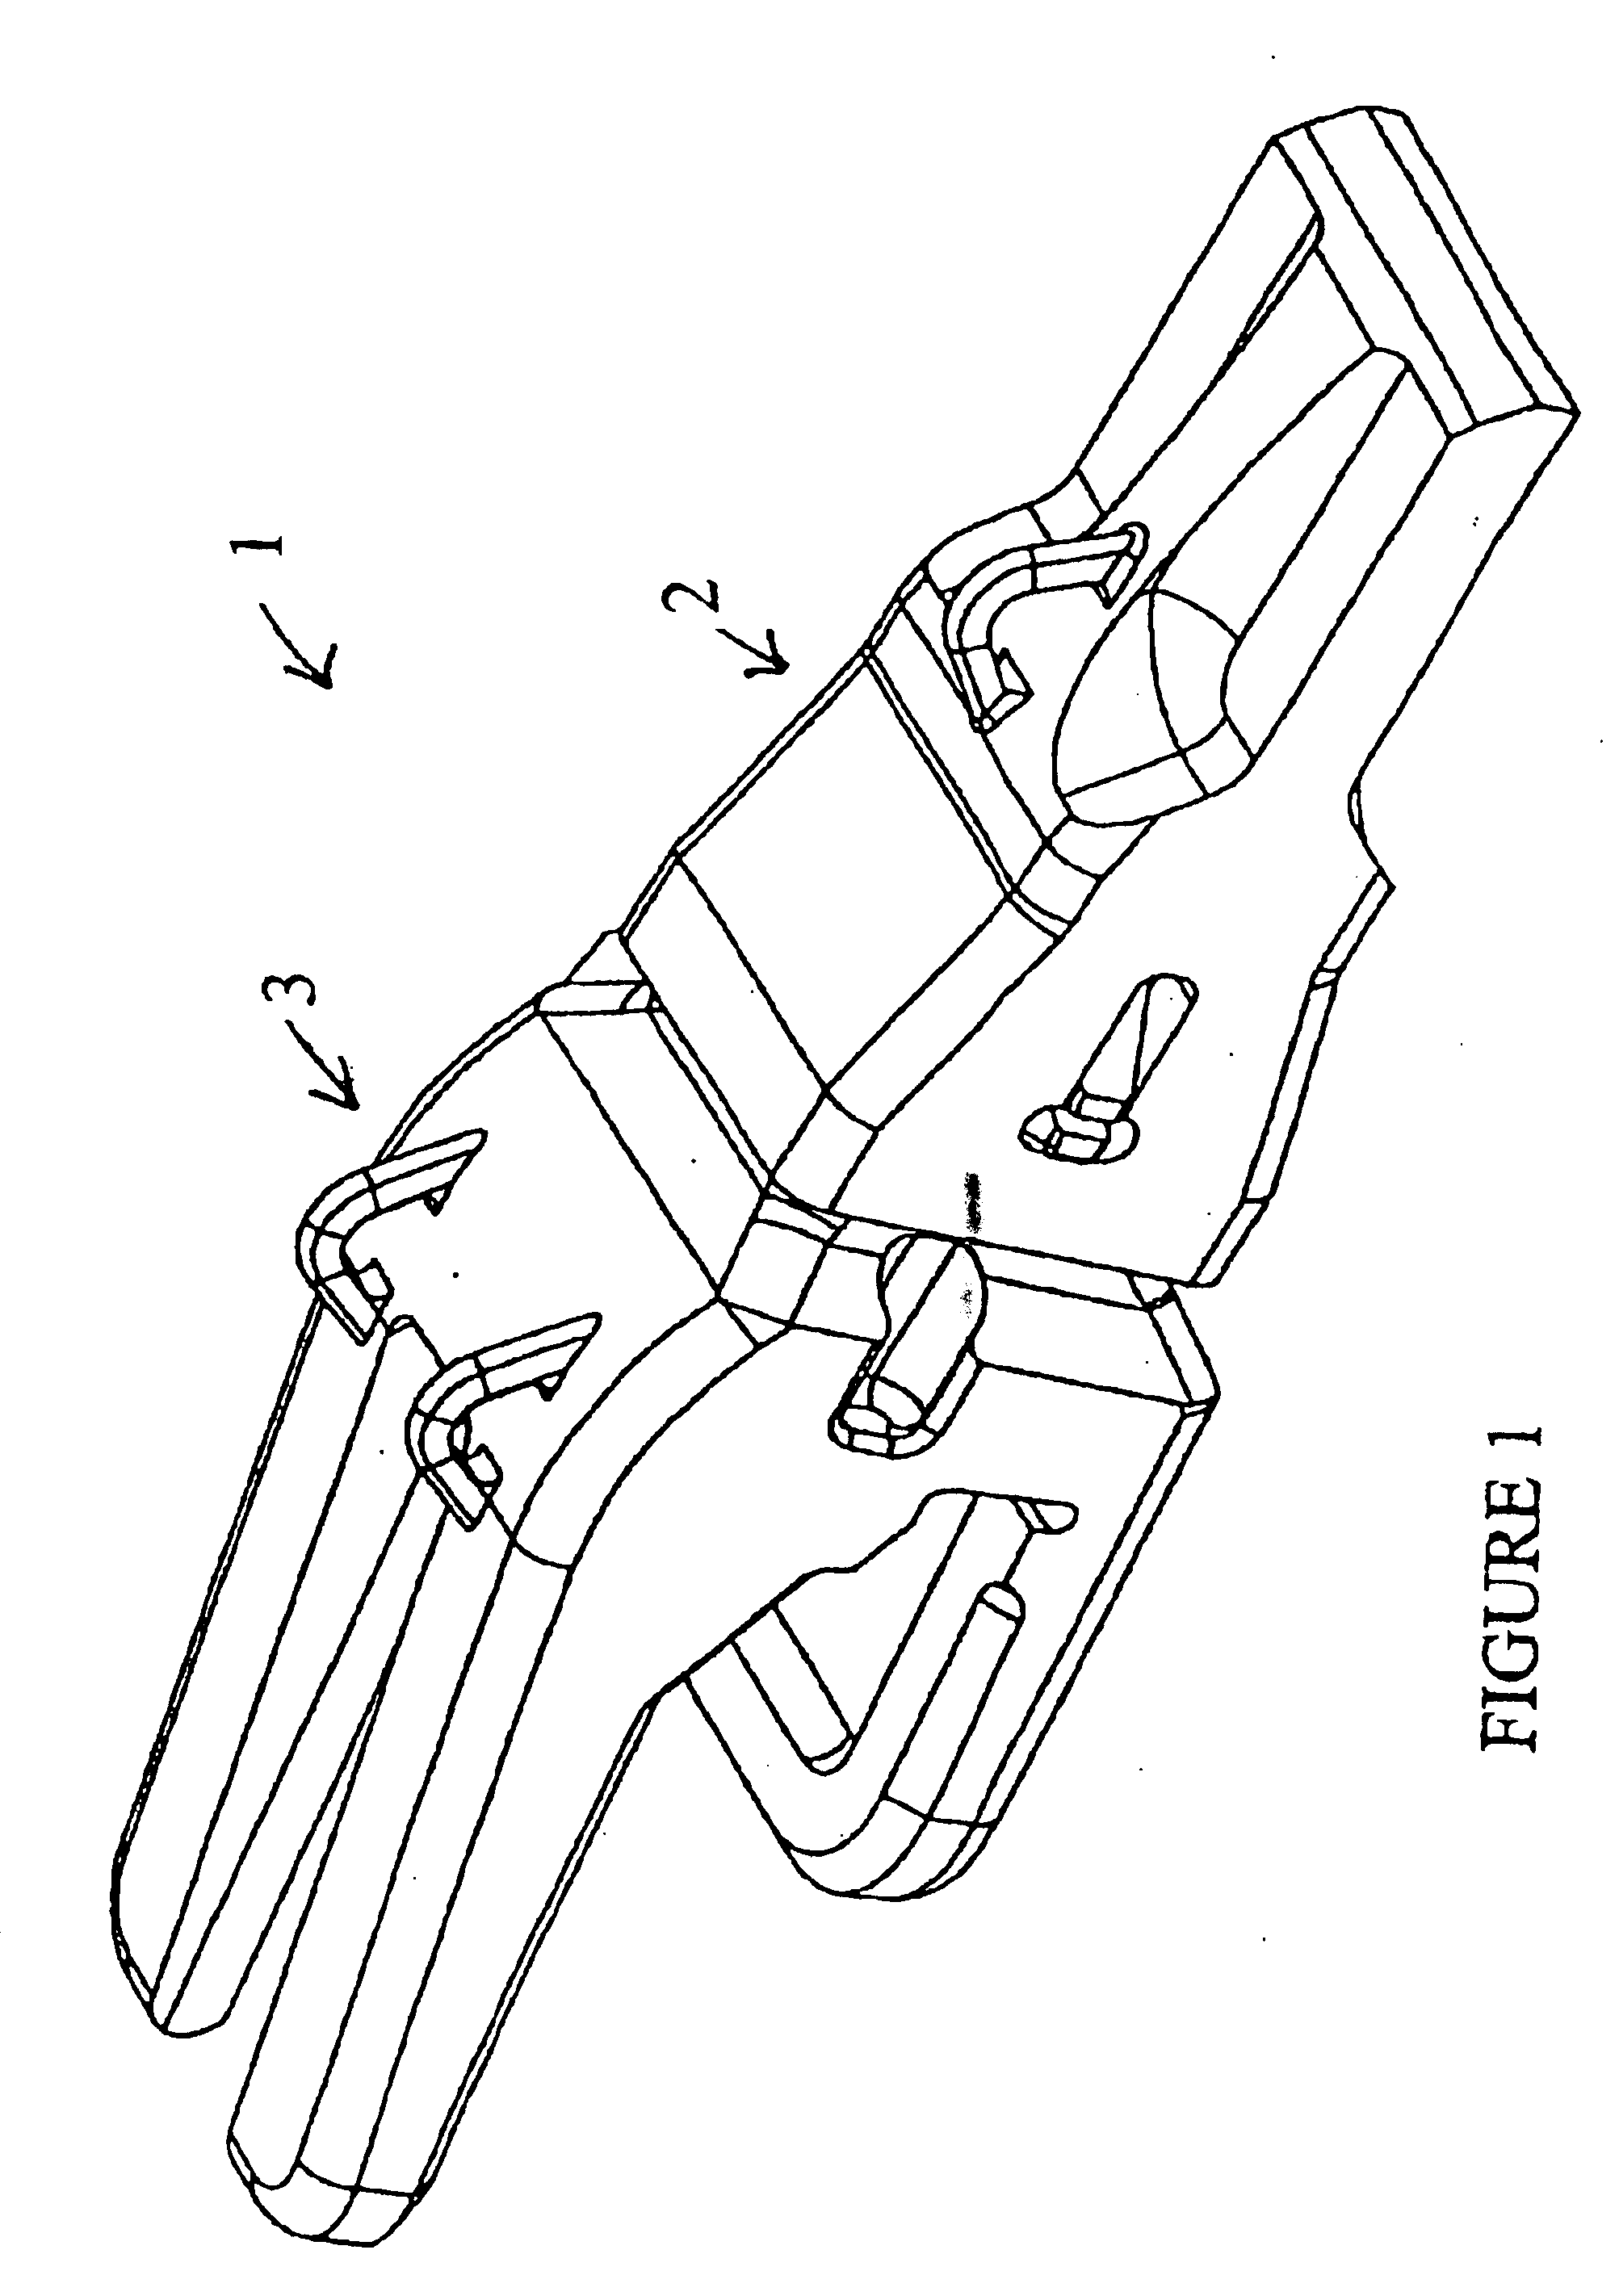 Locking assembly and method